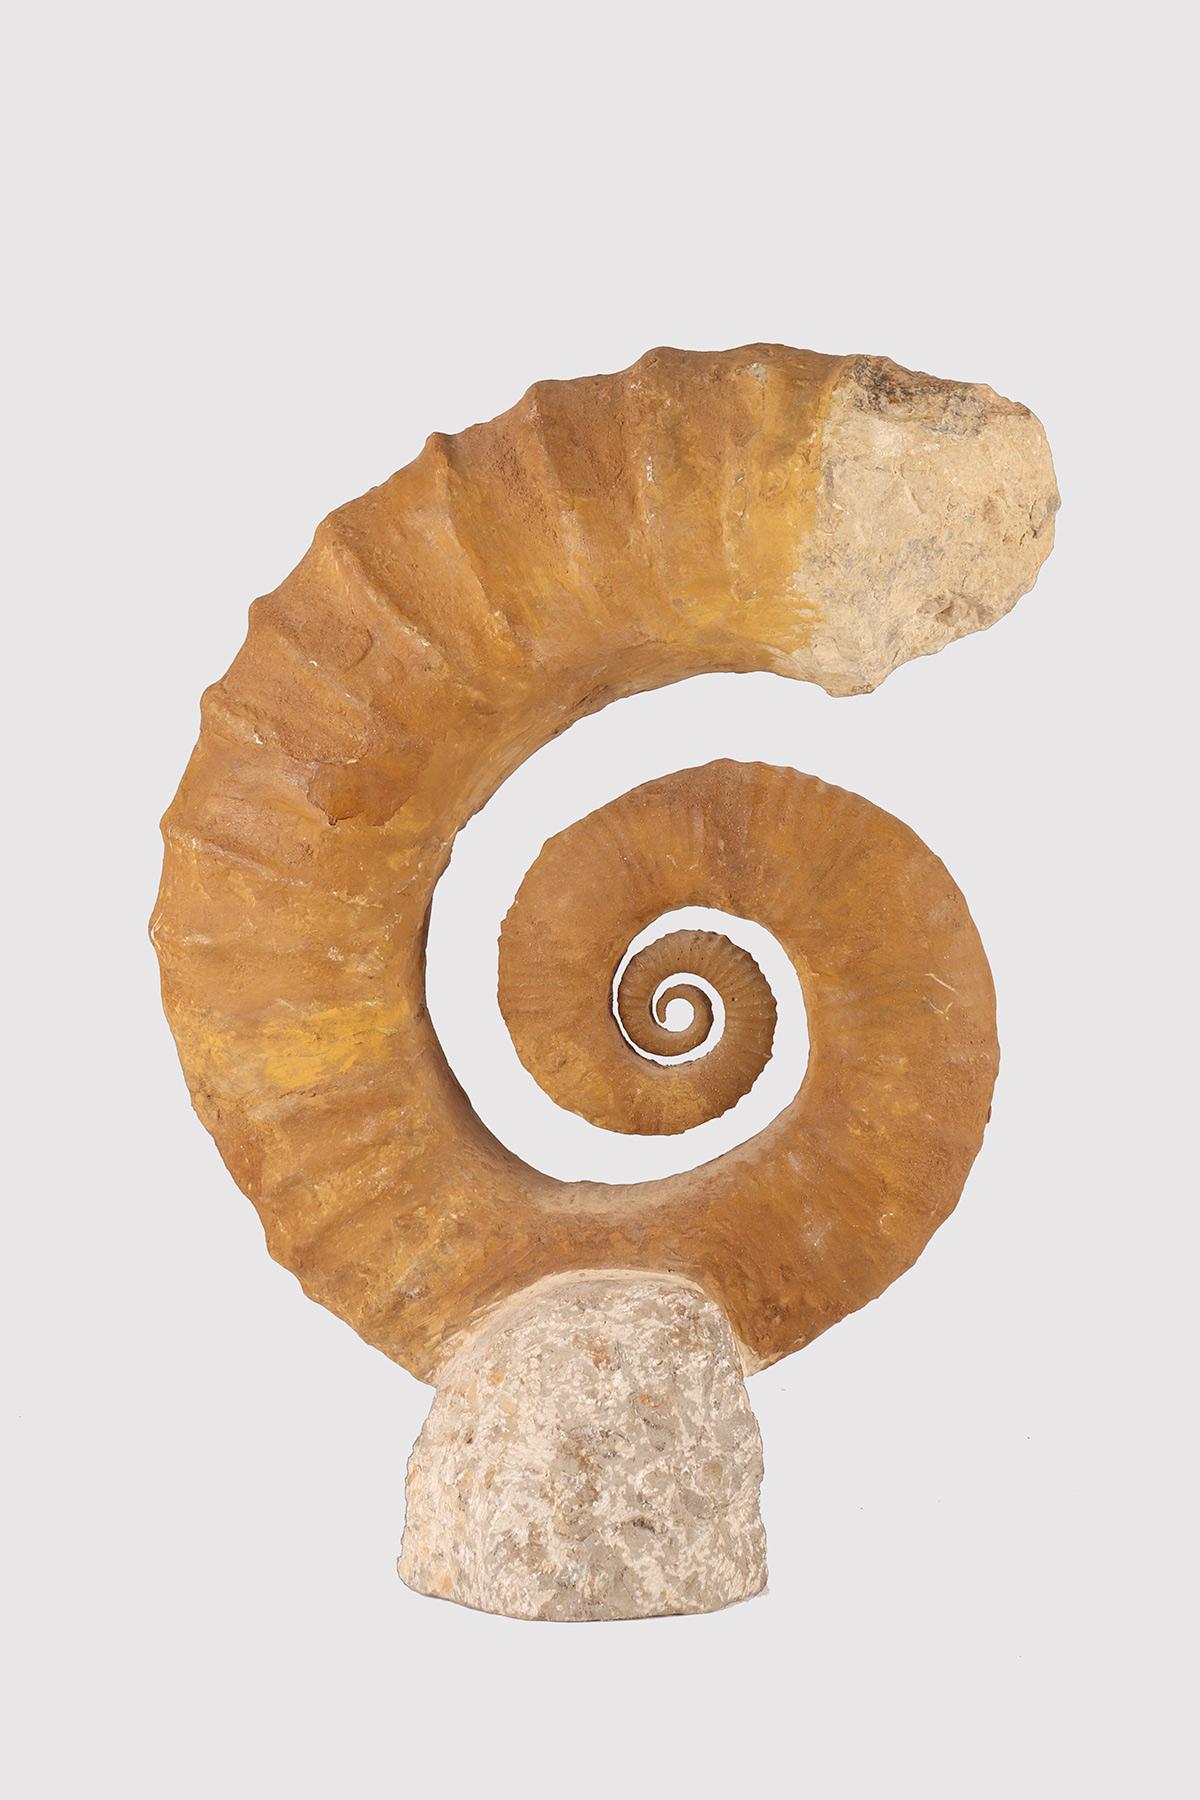 A large and rare specimen of open-coiled Heteromorphic Ammonite fossil specimen, in Burgundy Limestone stone. Ammonites (subclass Ammonidea) a group of extinct Cephalopod molluscs, which appeared in the lower Devonian (about 400 million years ago),